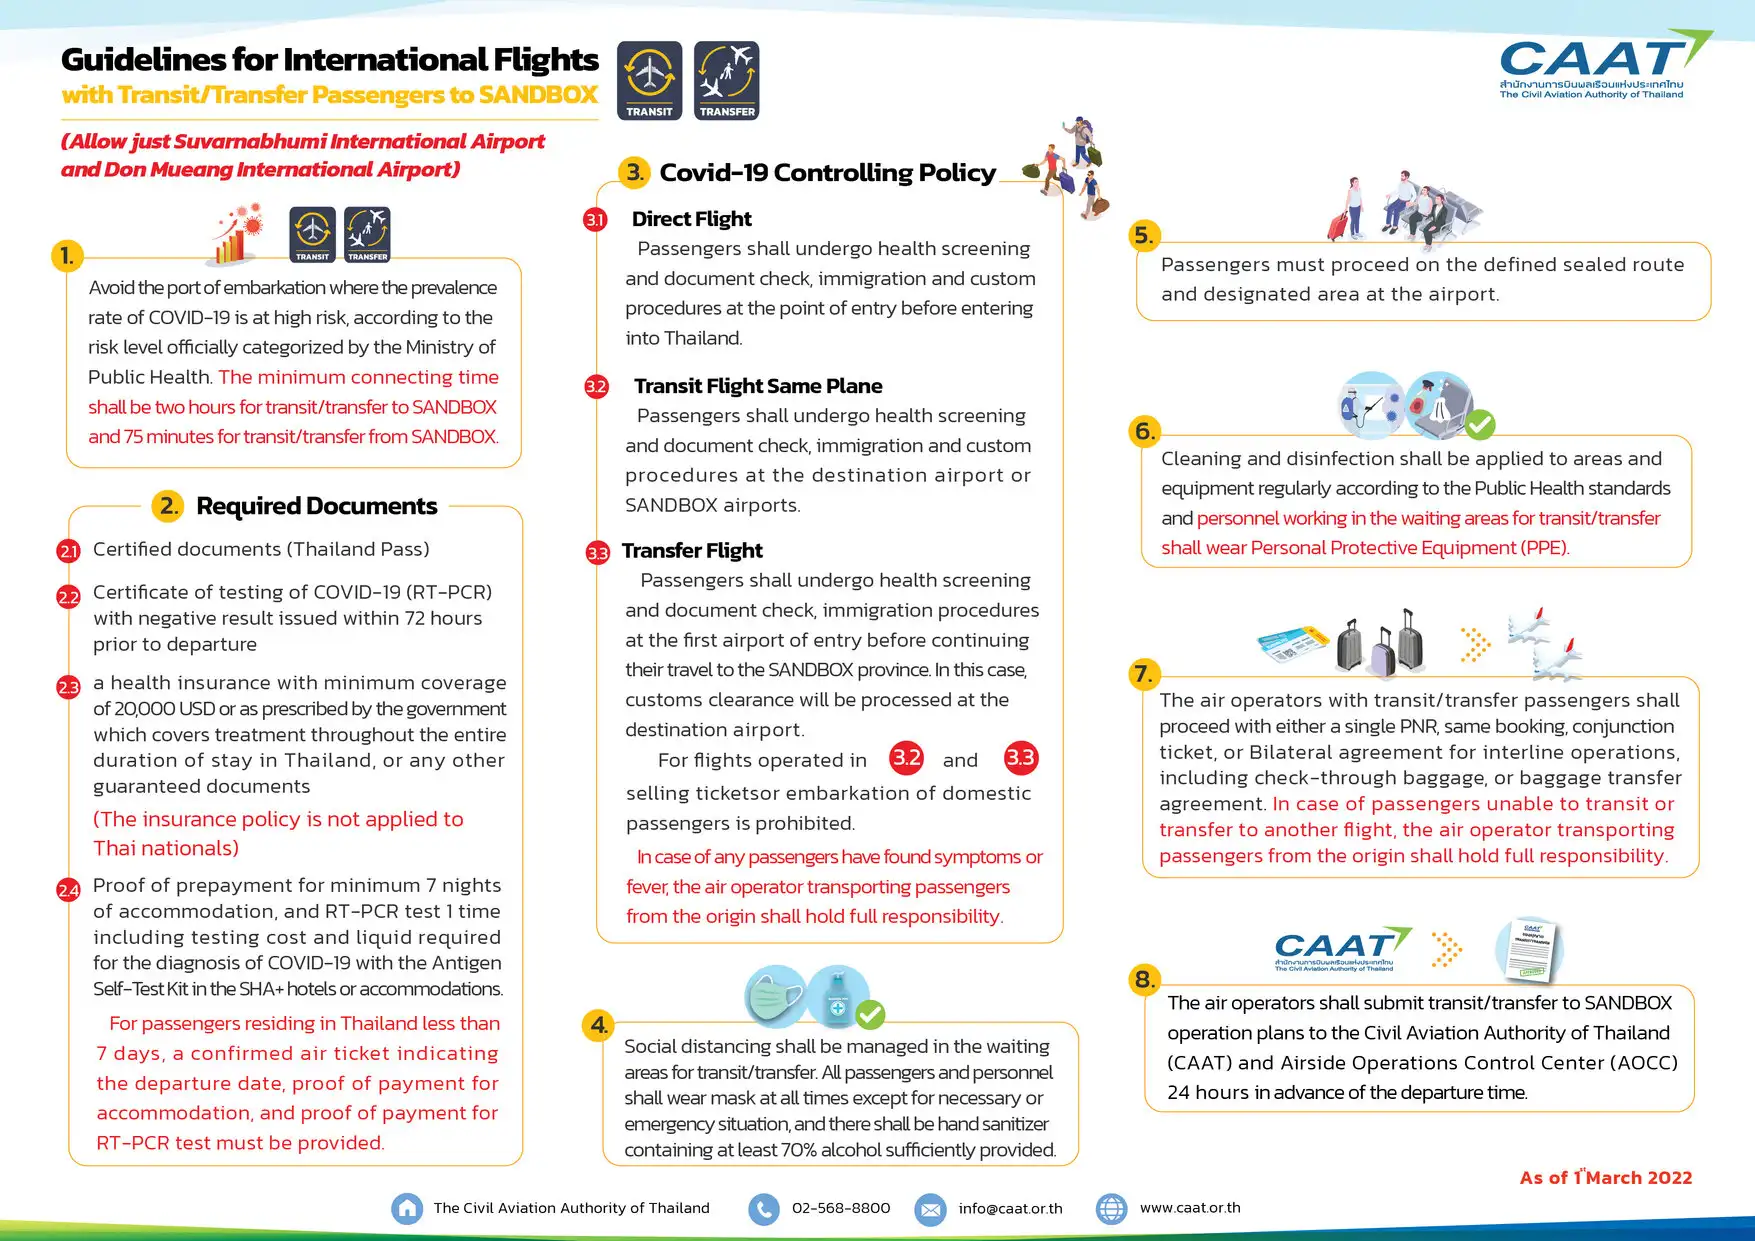 CAAT : Guidelines for International flight with Transit/Transfer passengers [March 2022] HealthServ